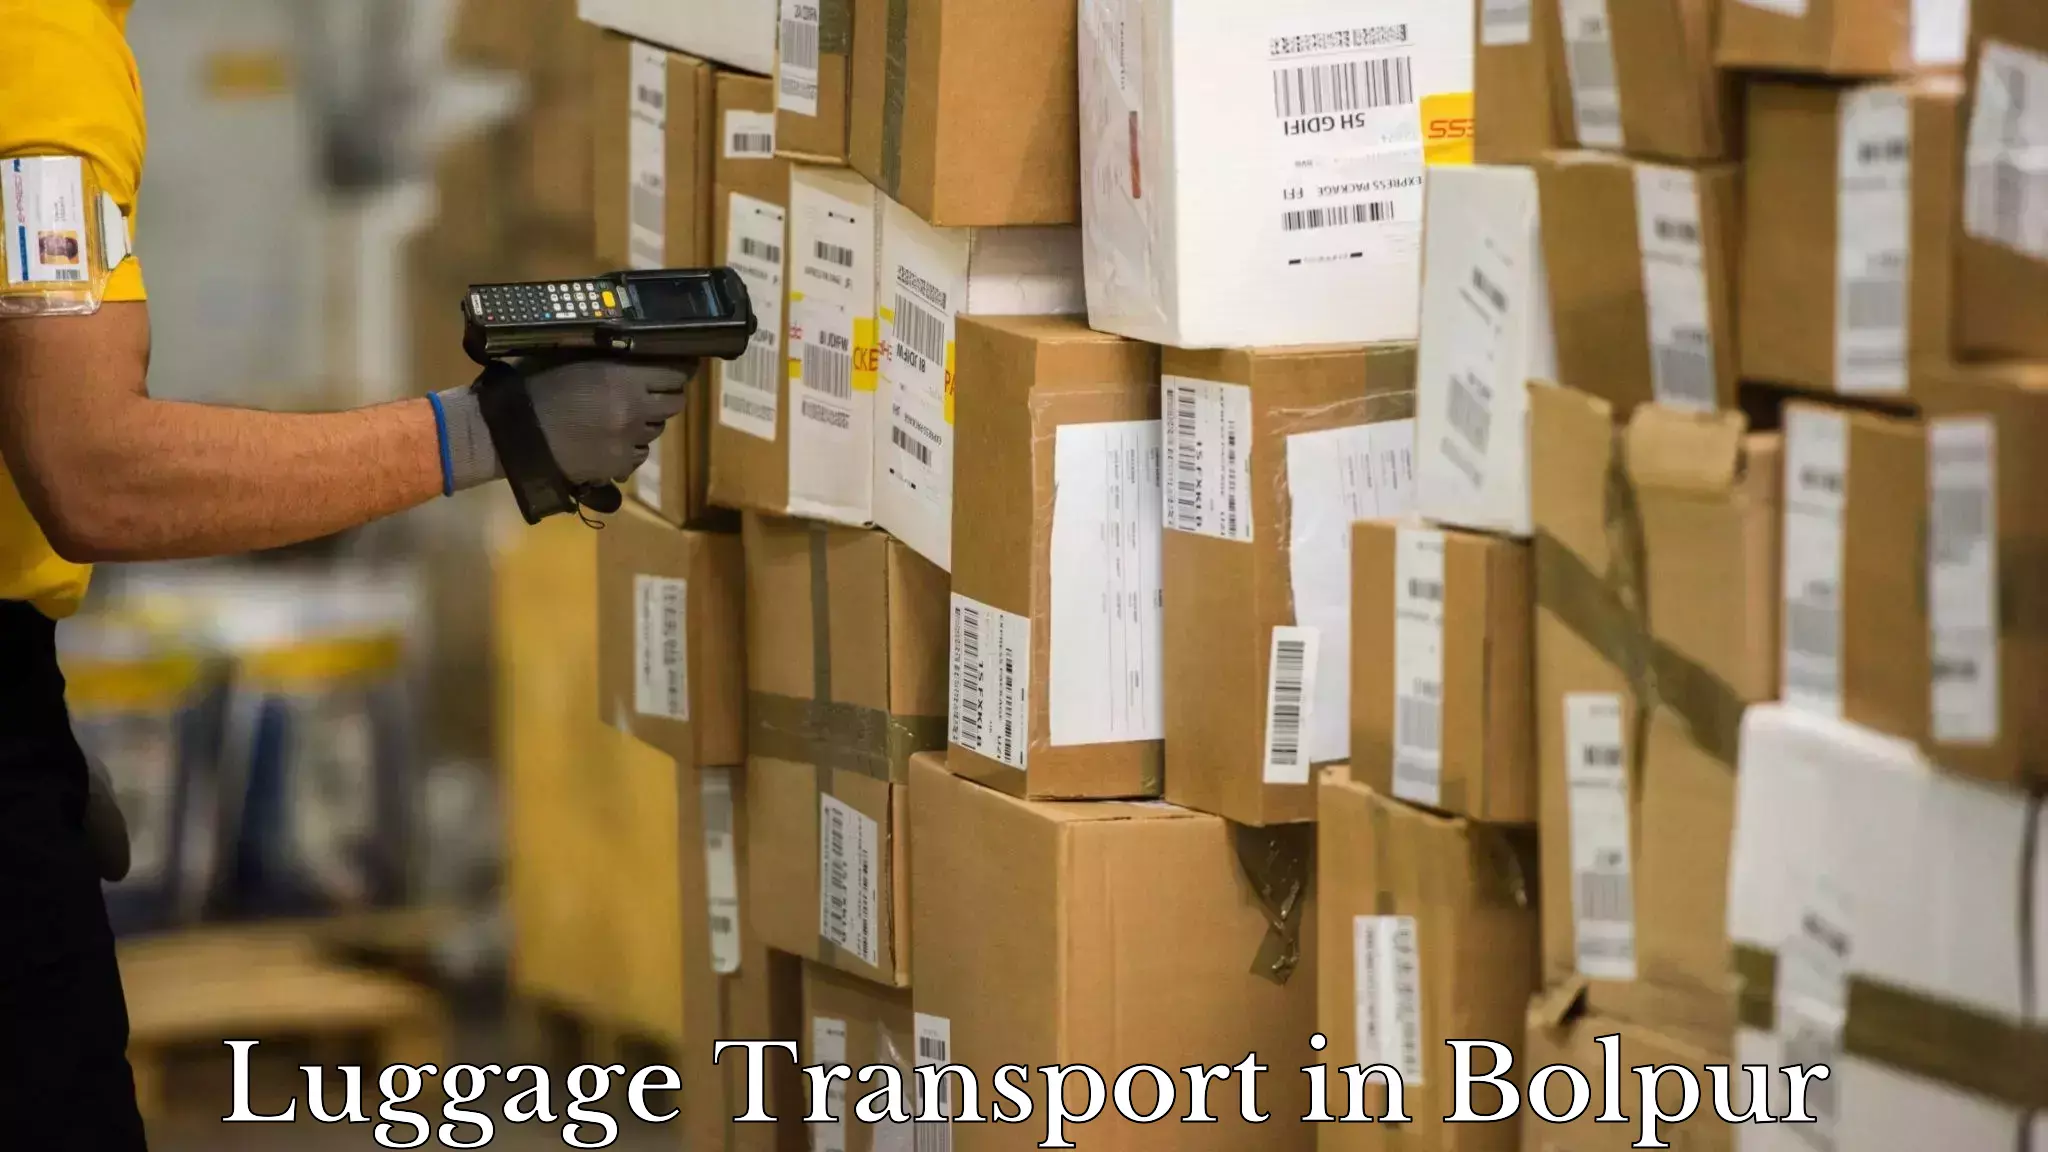 Luggage transport solutions in Bolpur